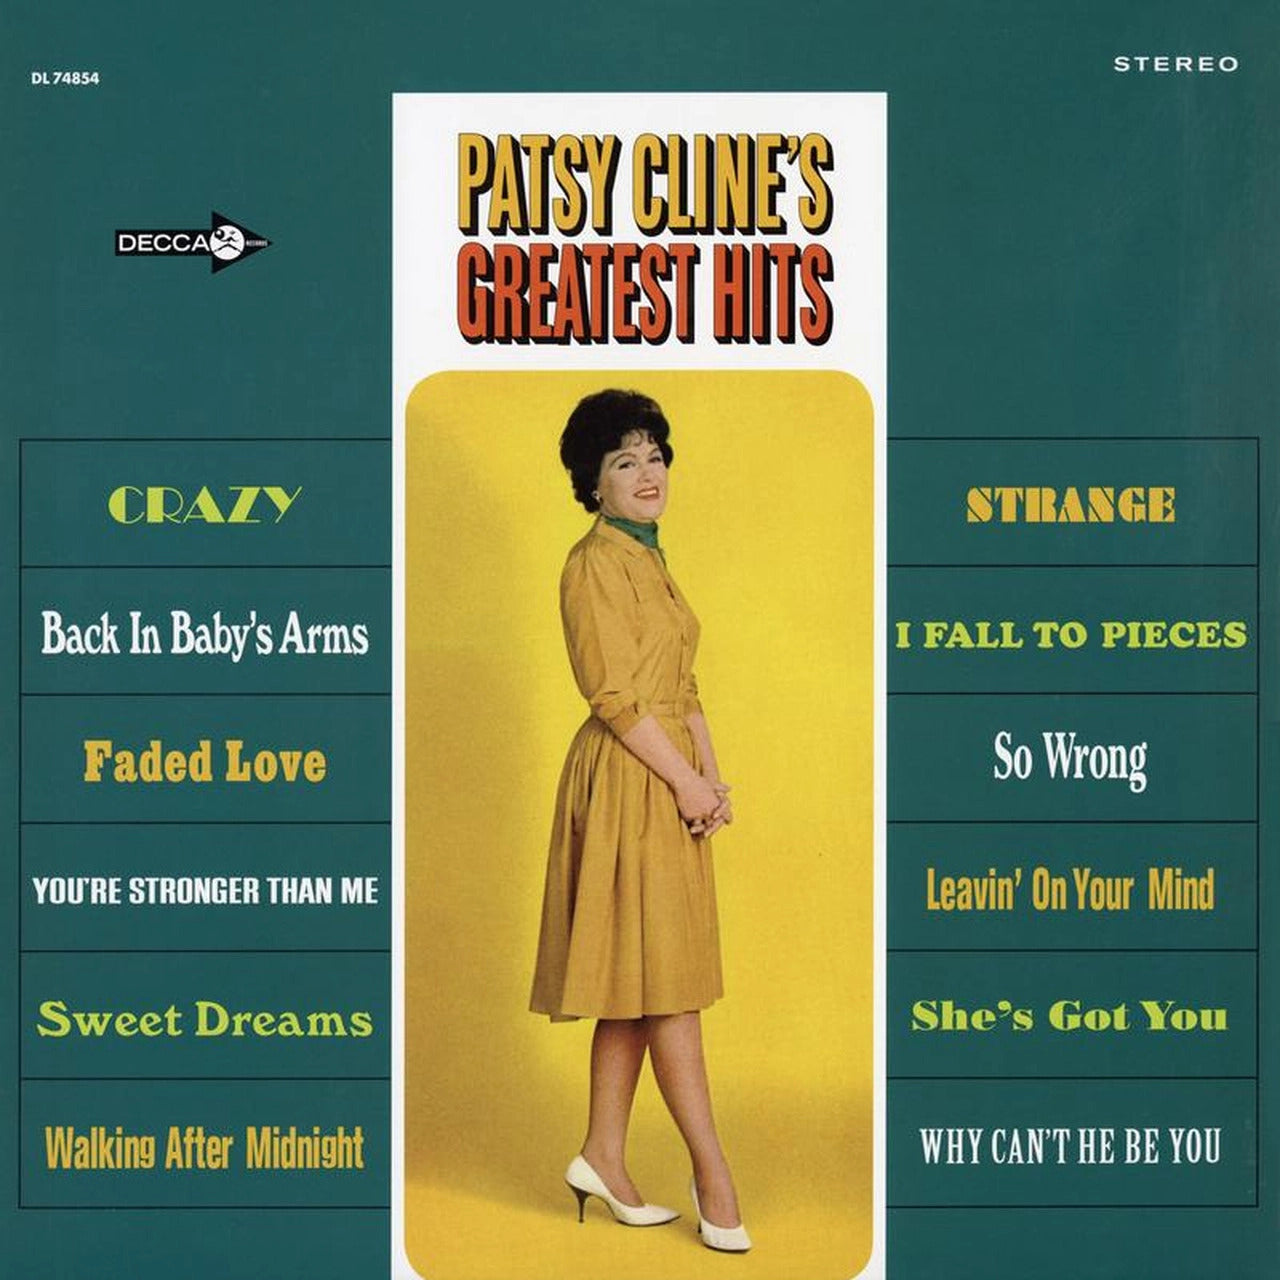 PATSY CLINE GREATEST HITS LP